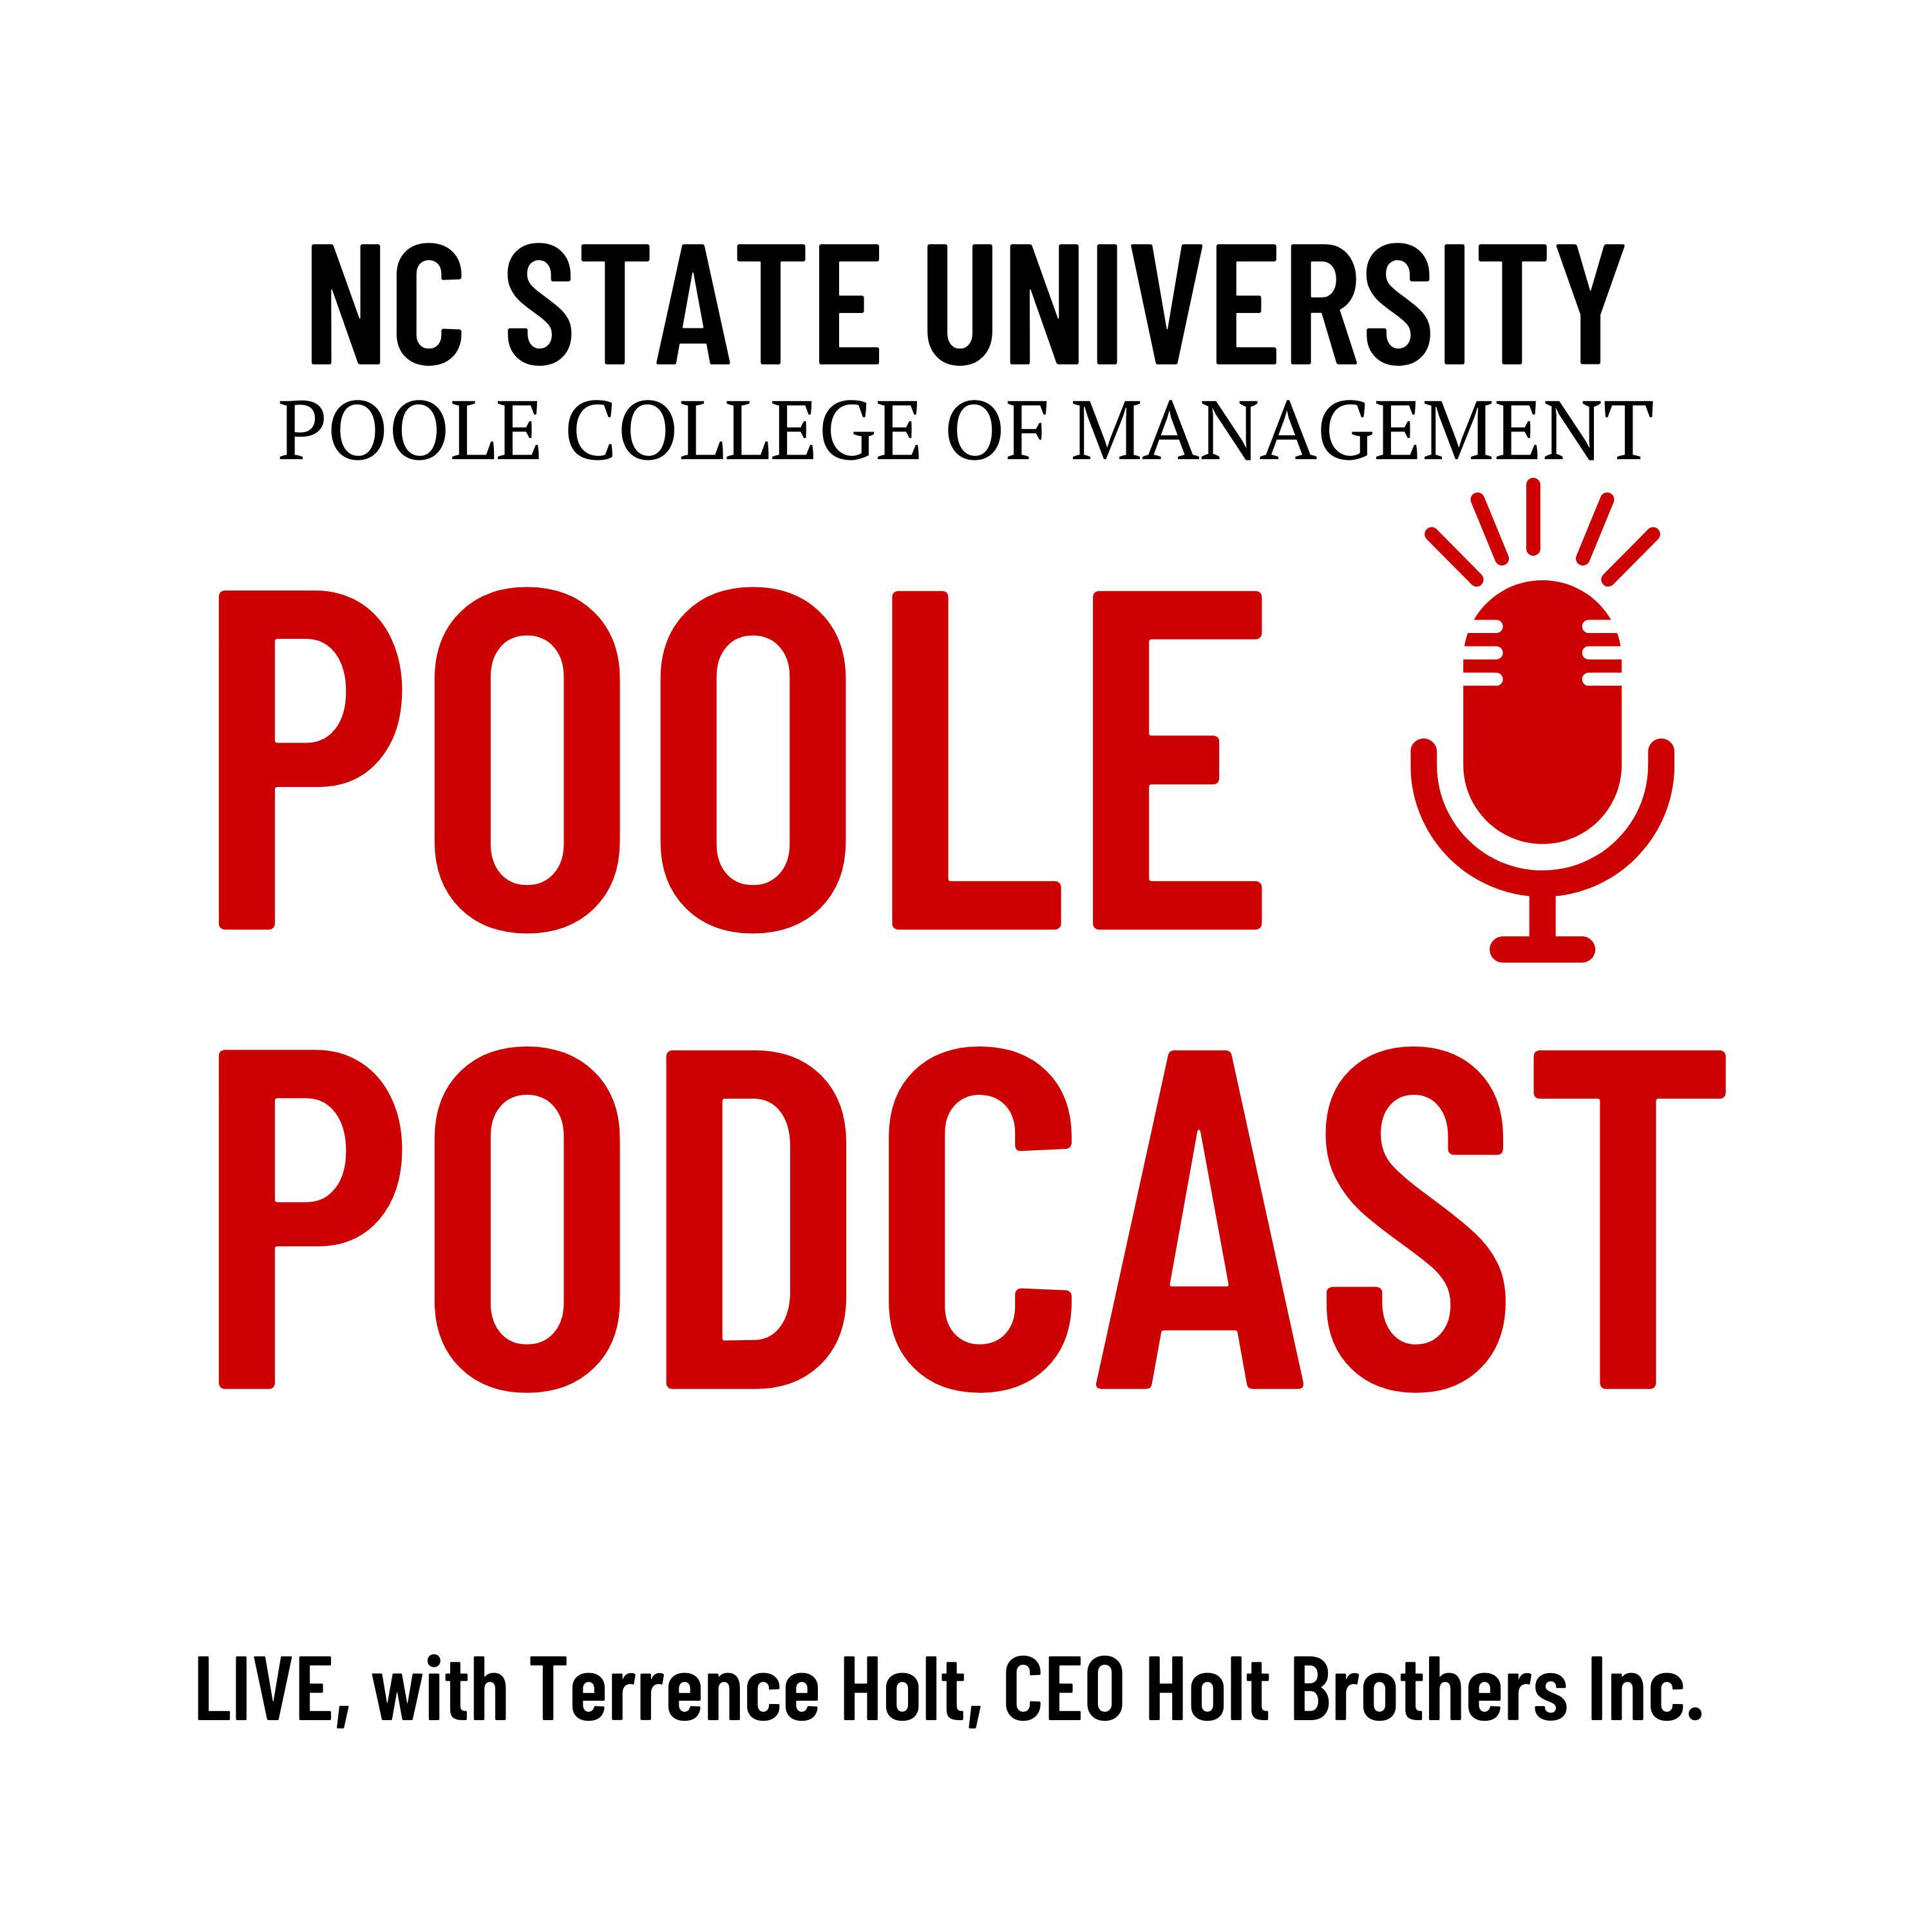 LIVE with Terrence Holt, CEO of Holt Brothers Inc.